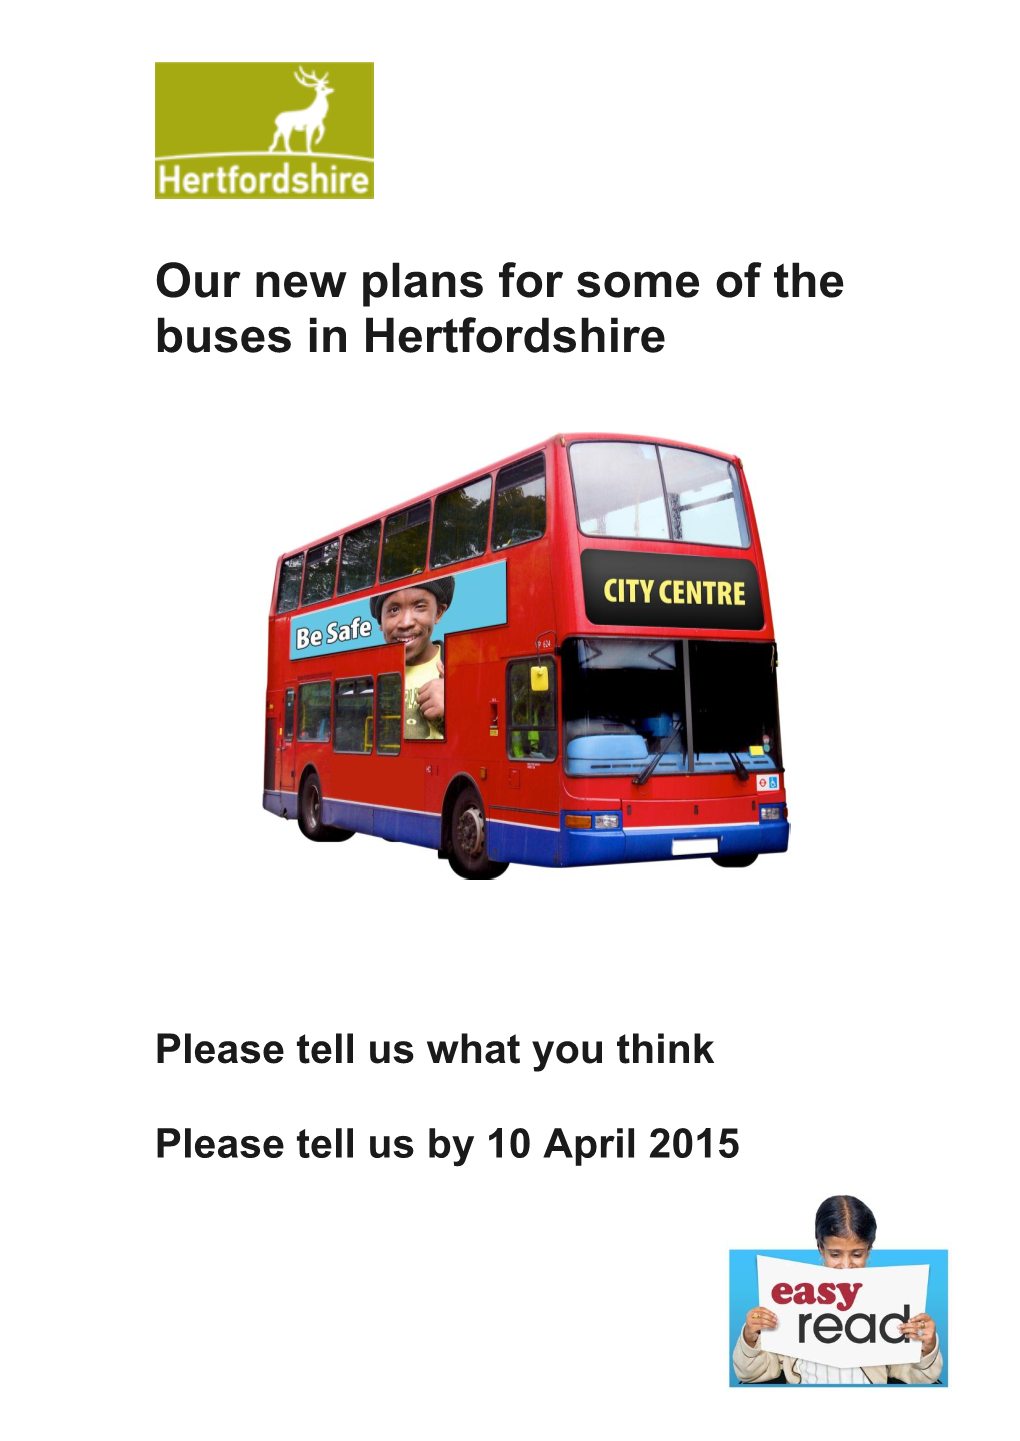 Our New Plans for Some of the Buses in Hertfordshire